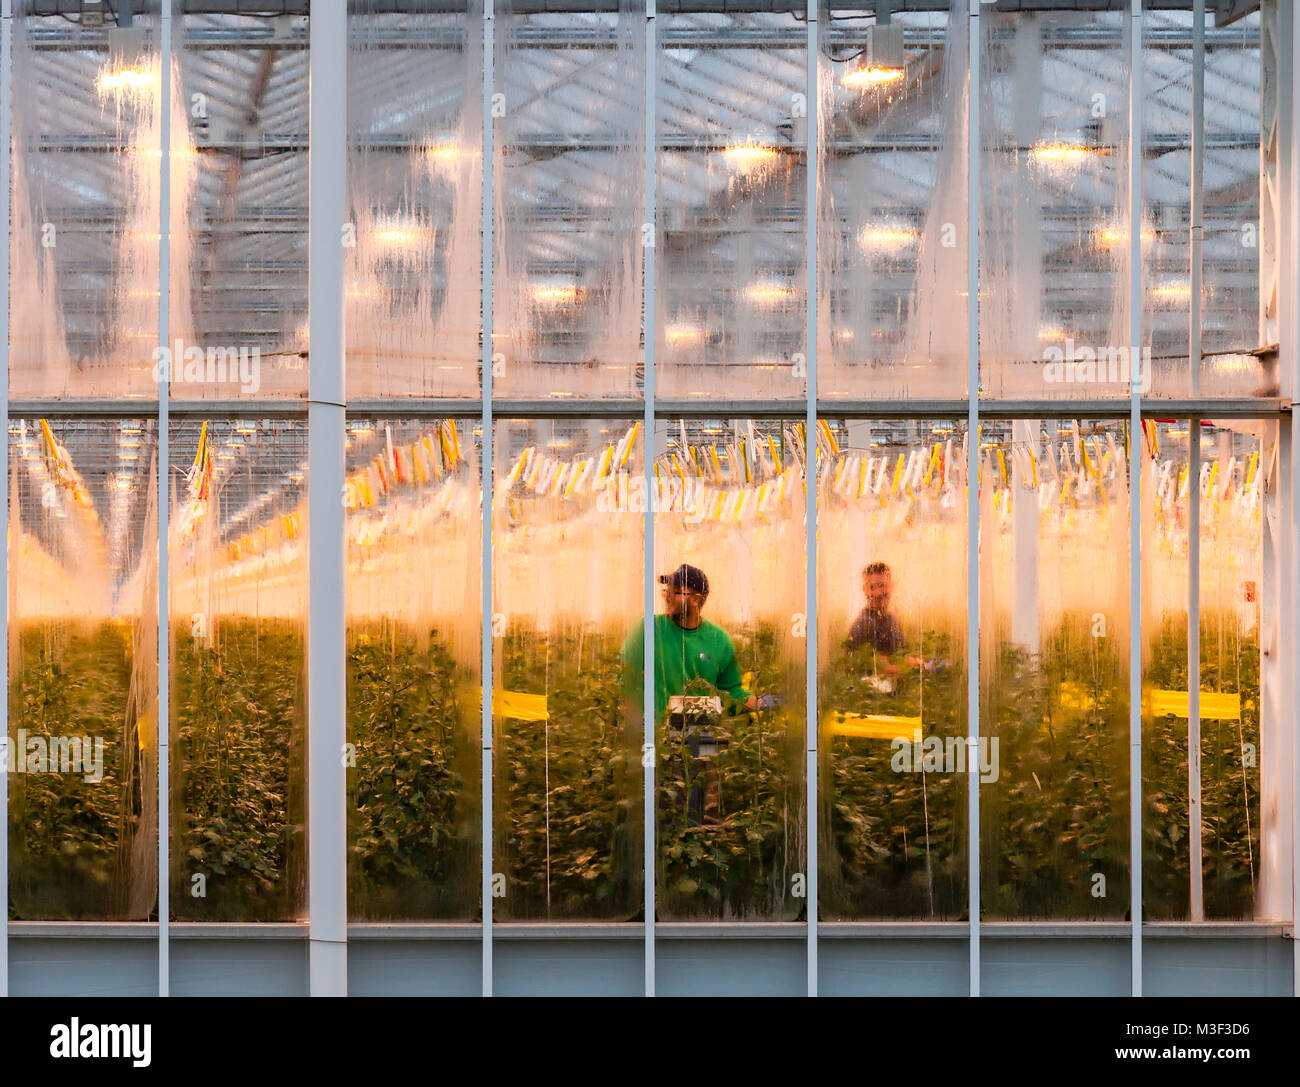 Workers in the Thanet Earth greenhouses in winter, Kent, UK. Stock Photo